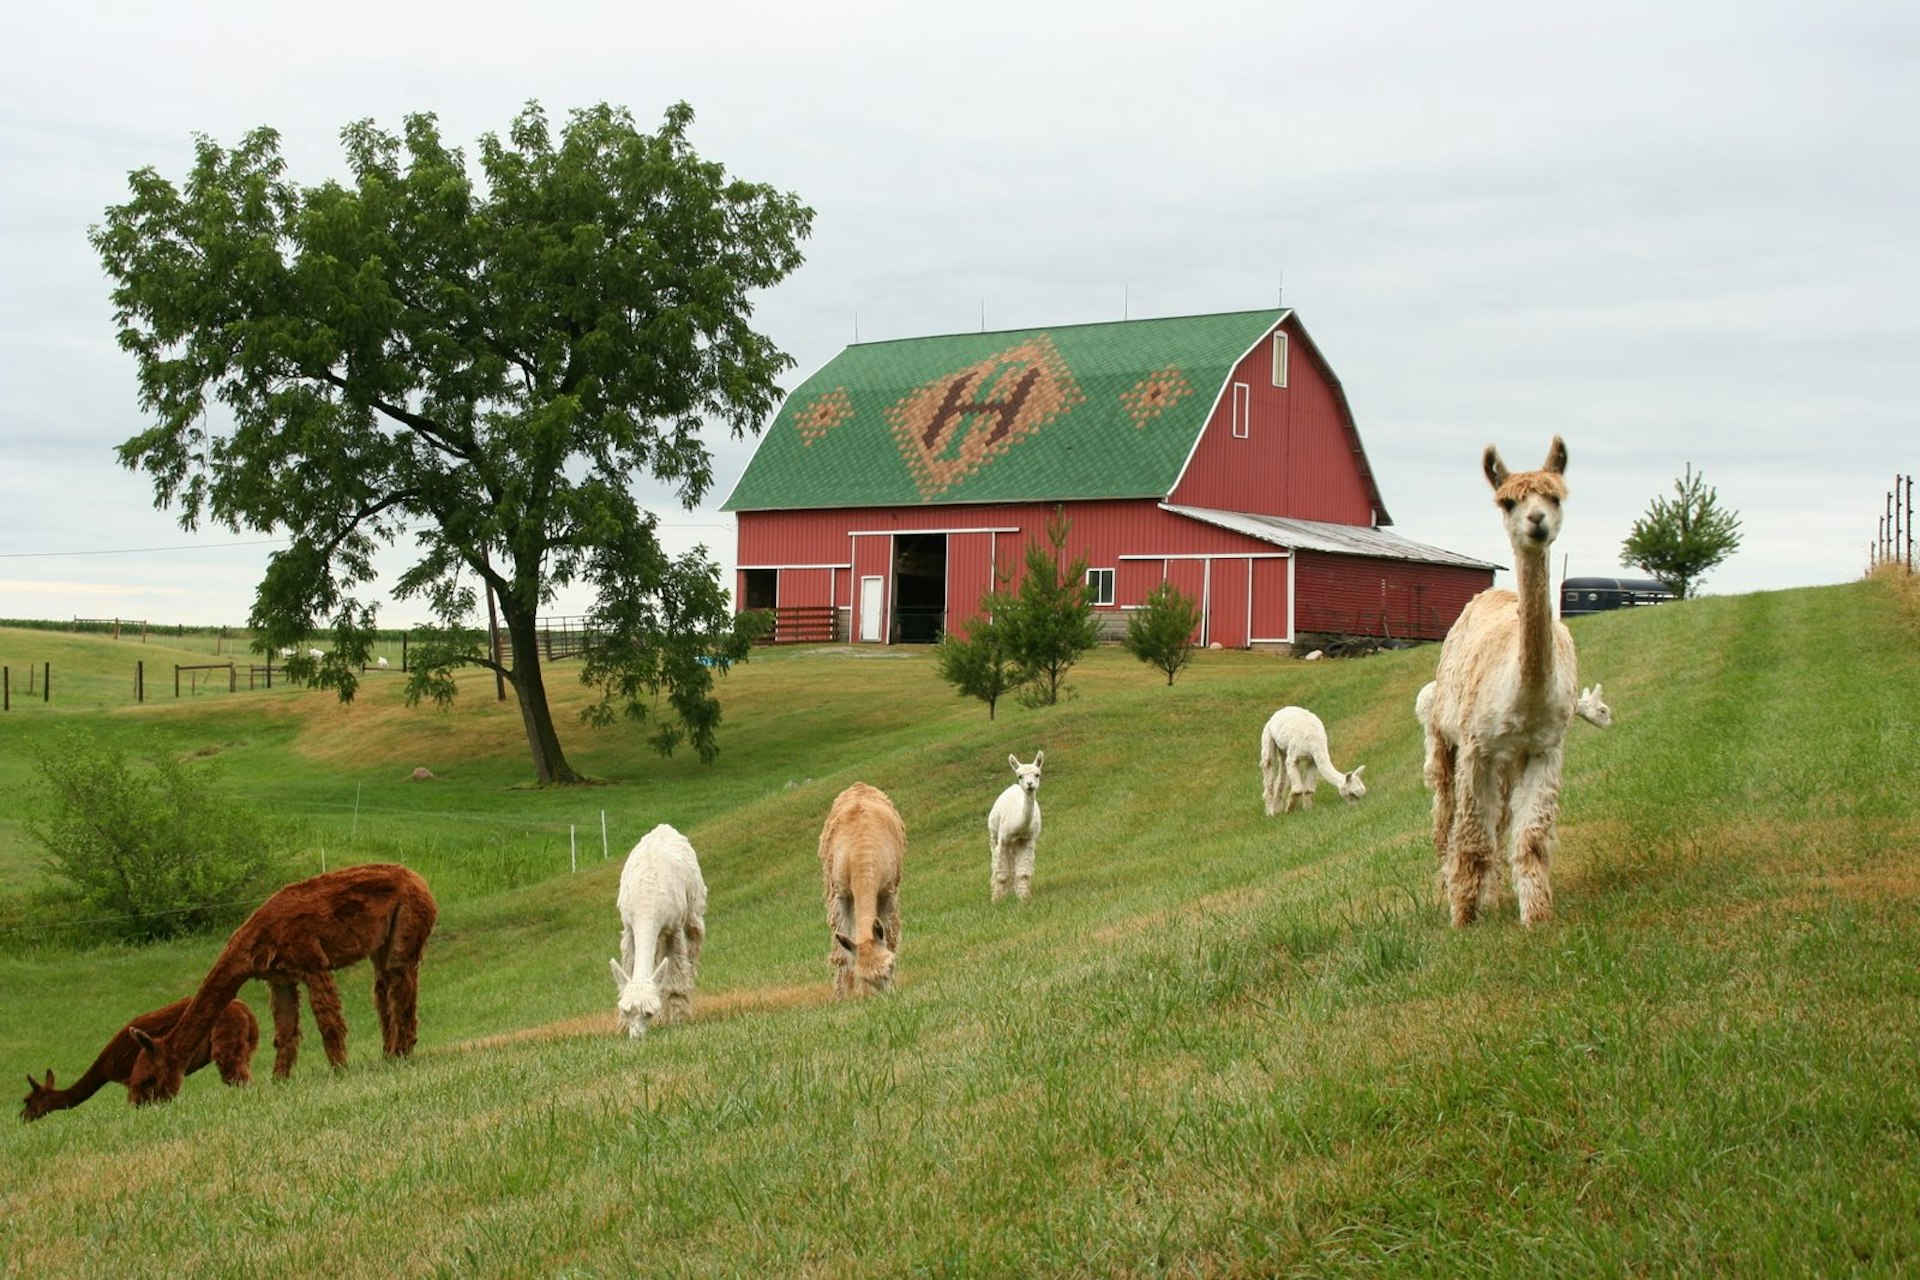 Alpacas standing in a field, with a farm house in the background